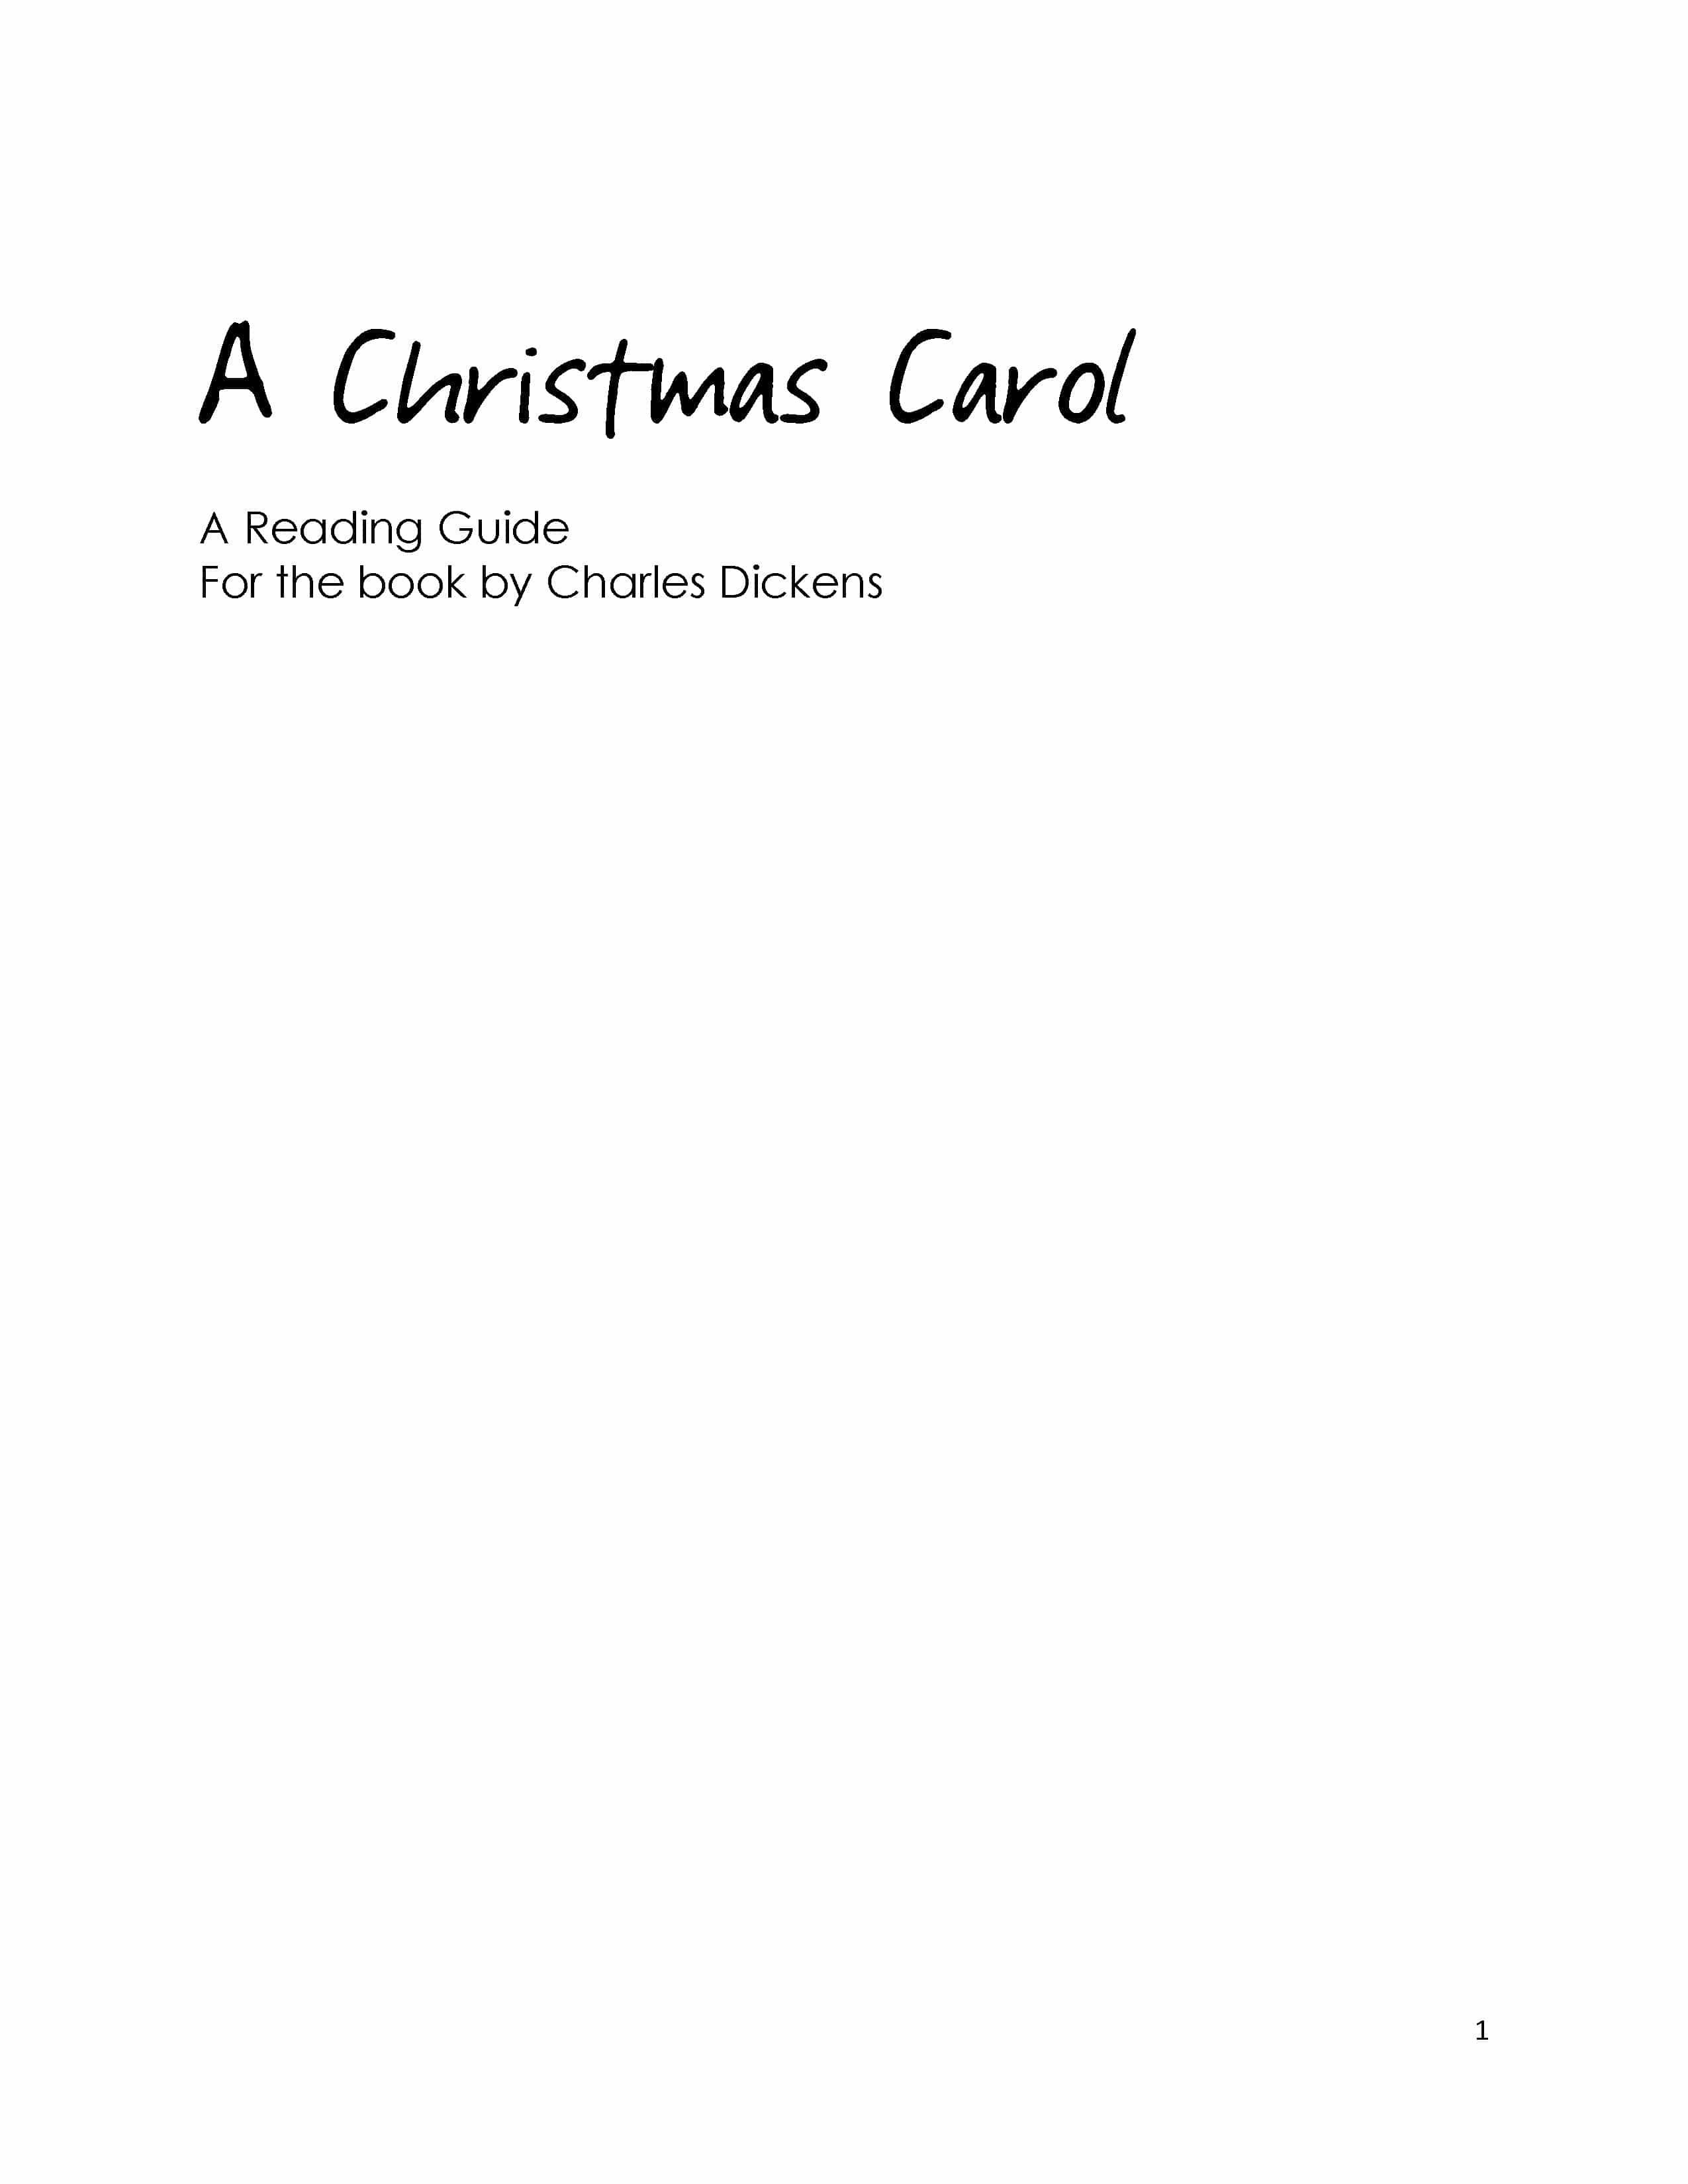 A Christmas Carol Reading Guide (Download)